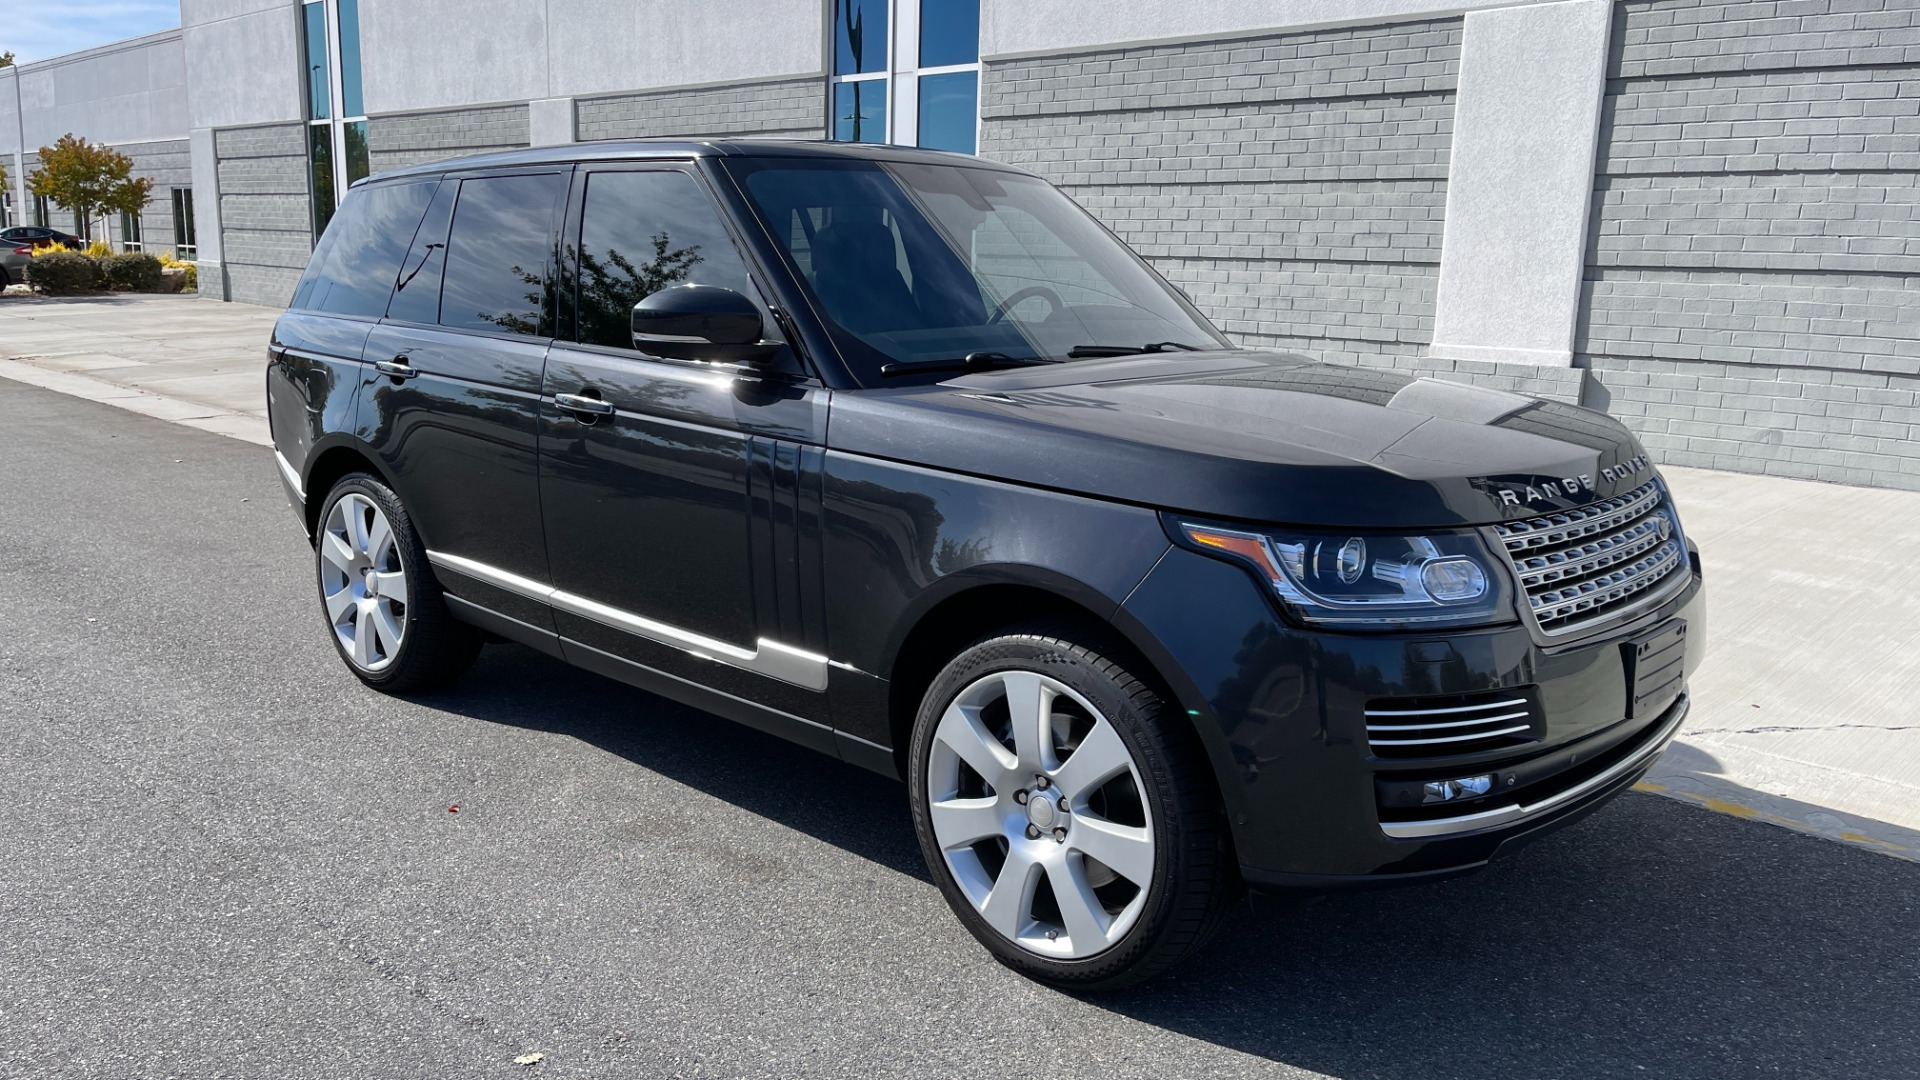 Used 2014 Land Rover Range Rover Supercharged Autobiography / 22IN WHEELS / PREMIUM PAINT / MASSAGE for sale $42,975 at Formula Imports in Charlotte NC 28227 7